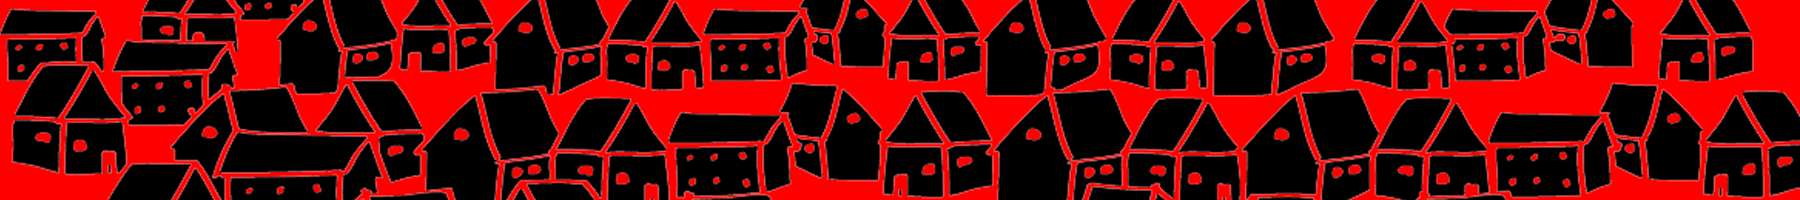 a little bigger black houses drawn on a red background